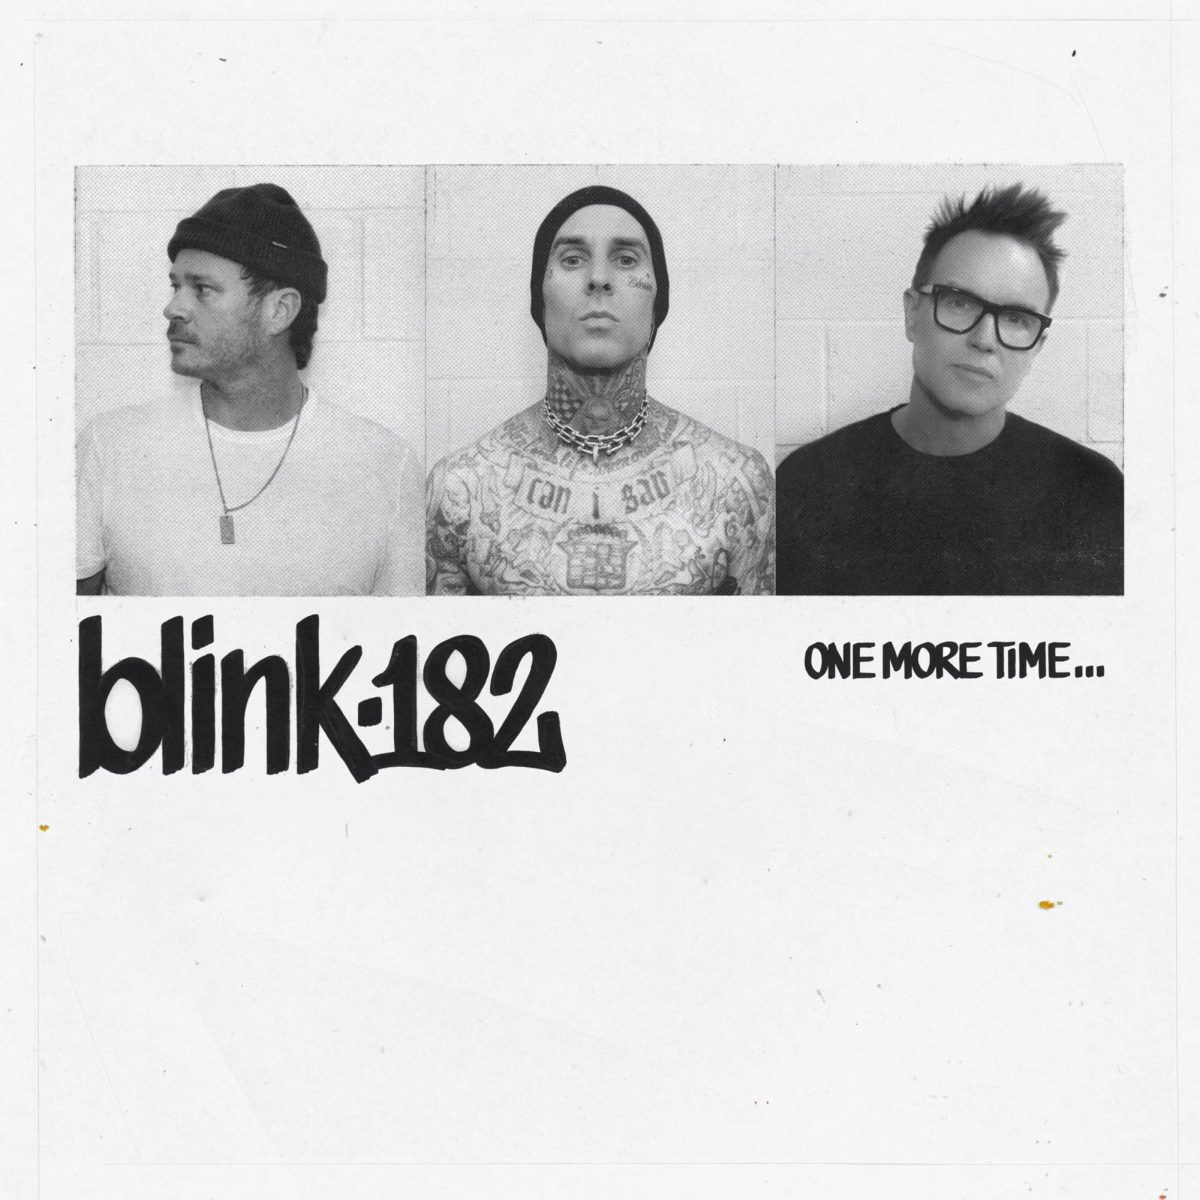 The album cover of Blink-182s new album, ONE MORE TIME.